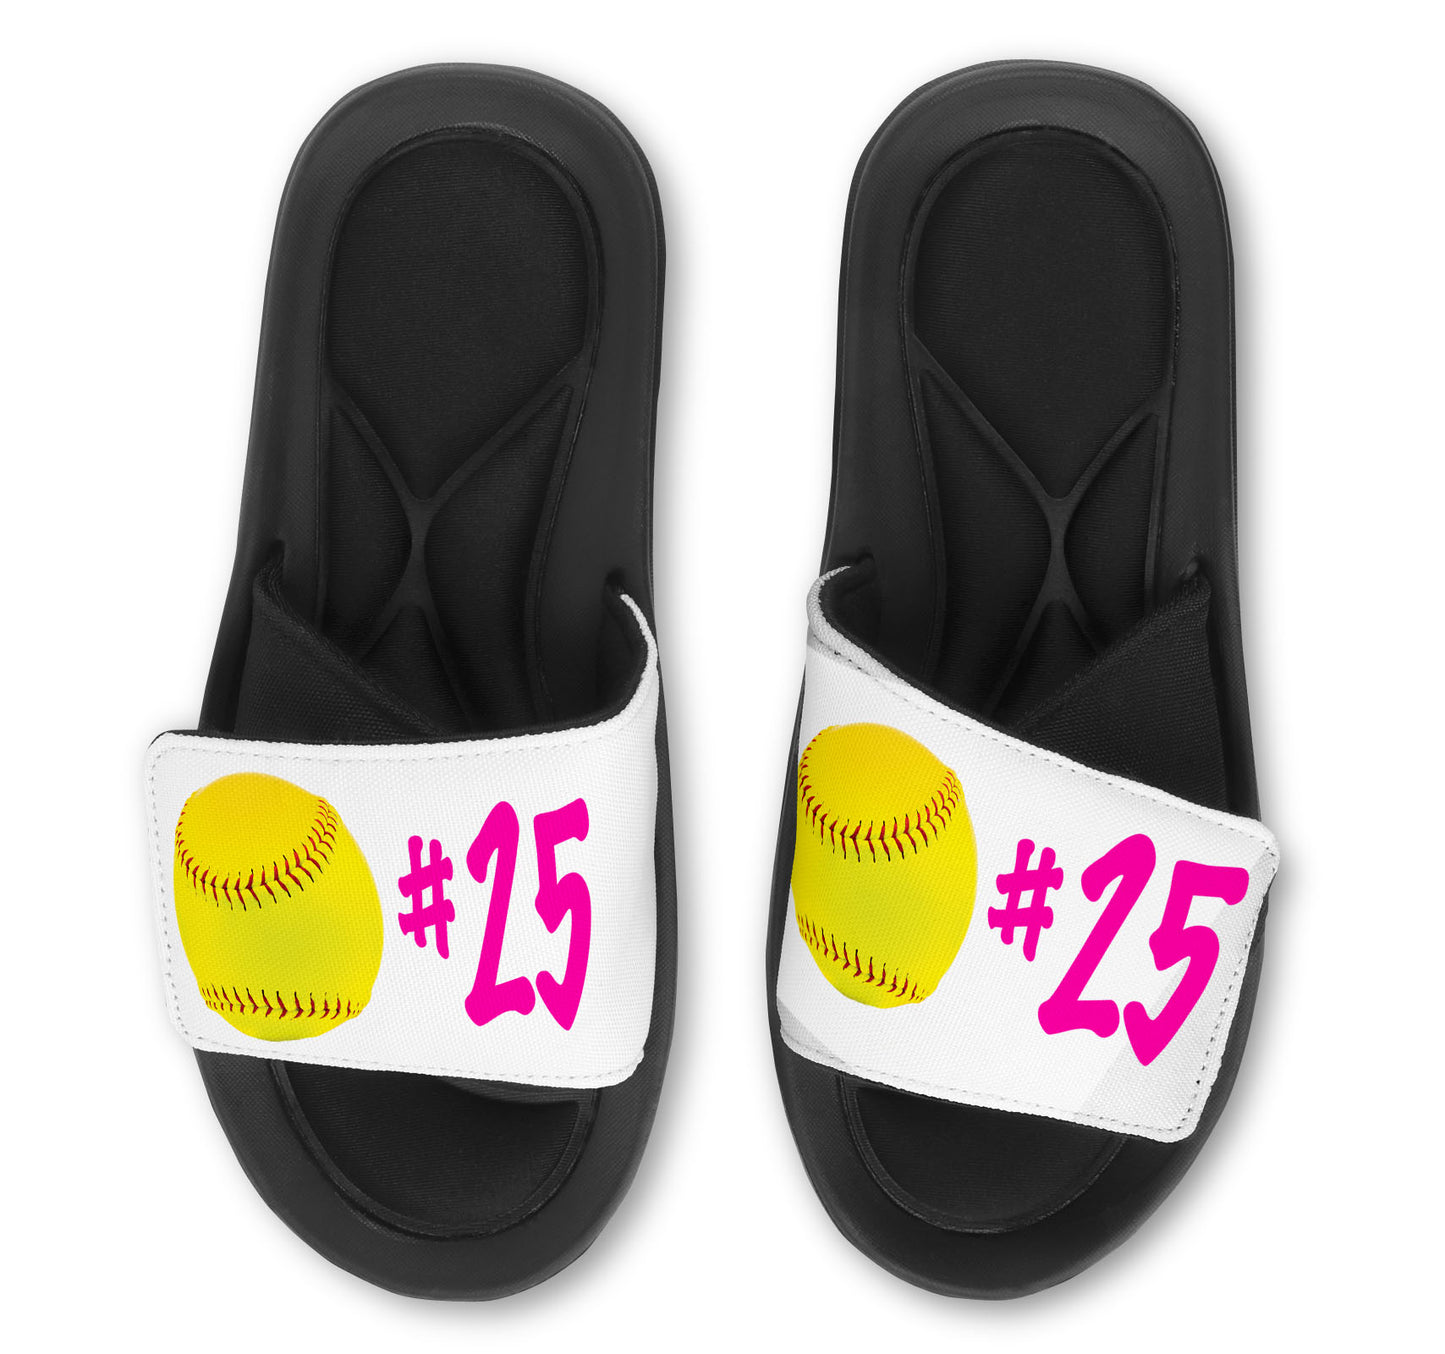 SOFTBALL FASTPITCH Slides Single Ball - Customize with Your Name and/or Number